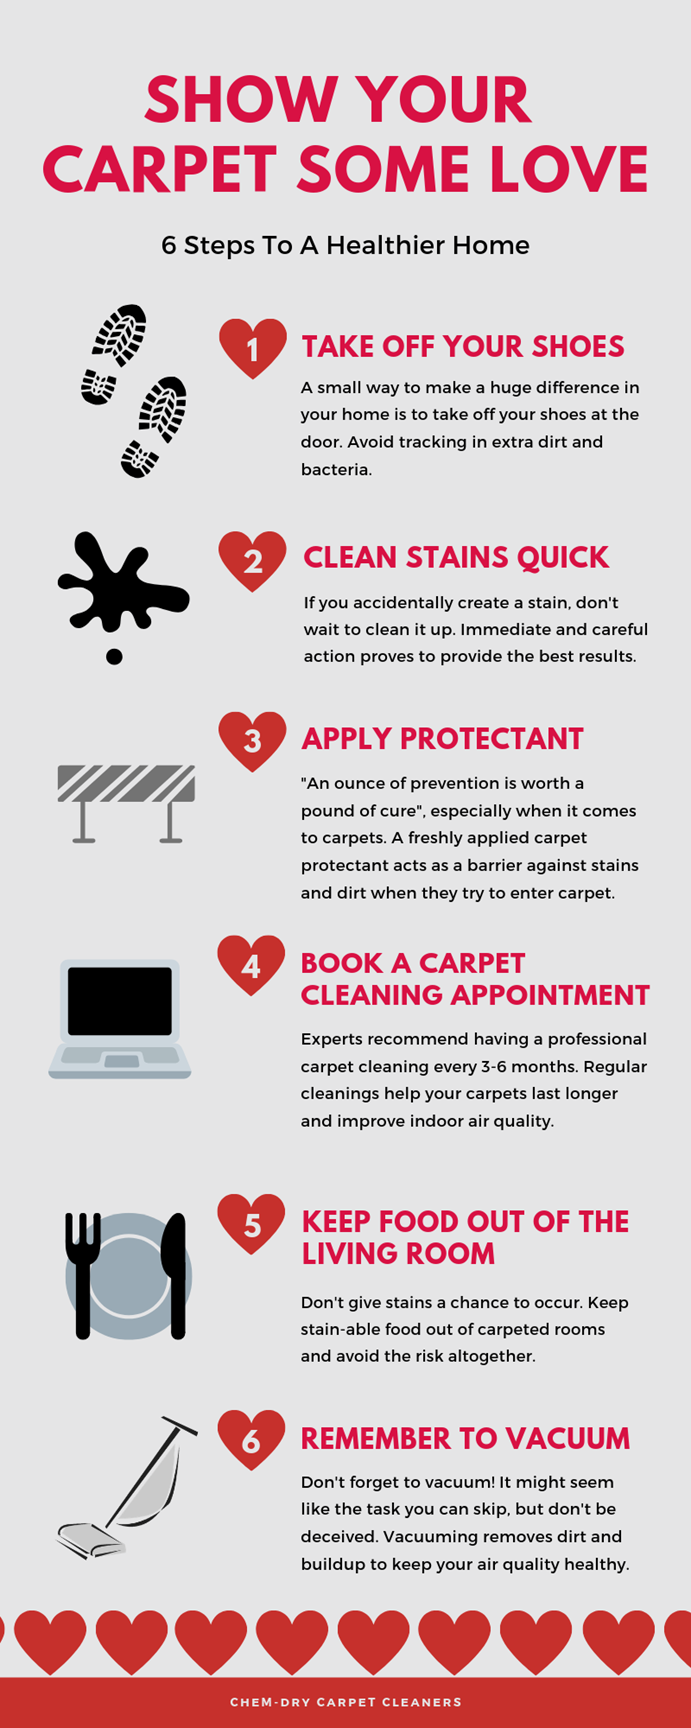 carpet cleaning in Corona CA keep your carpet cleaner with 6 quick tips